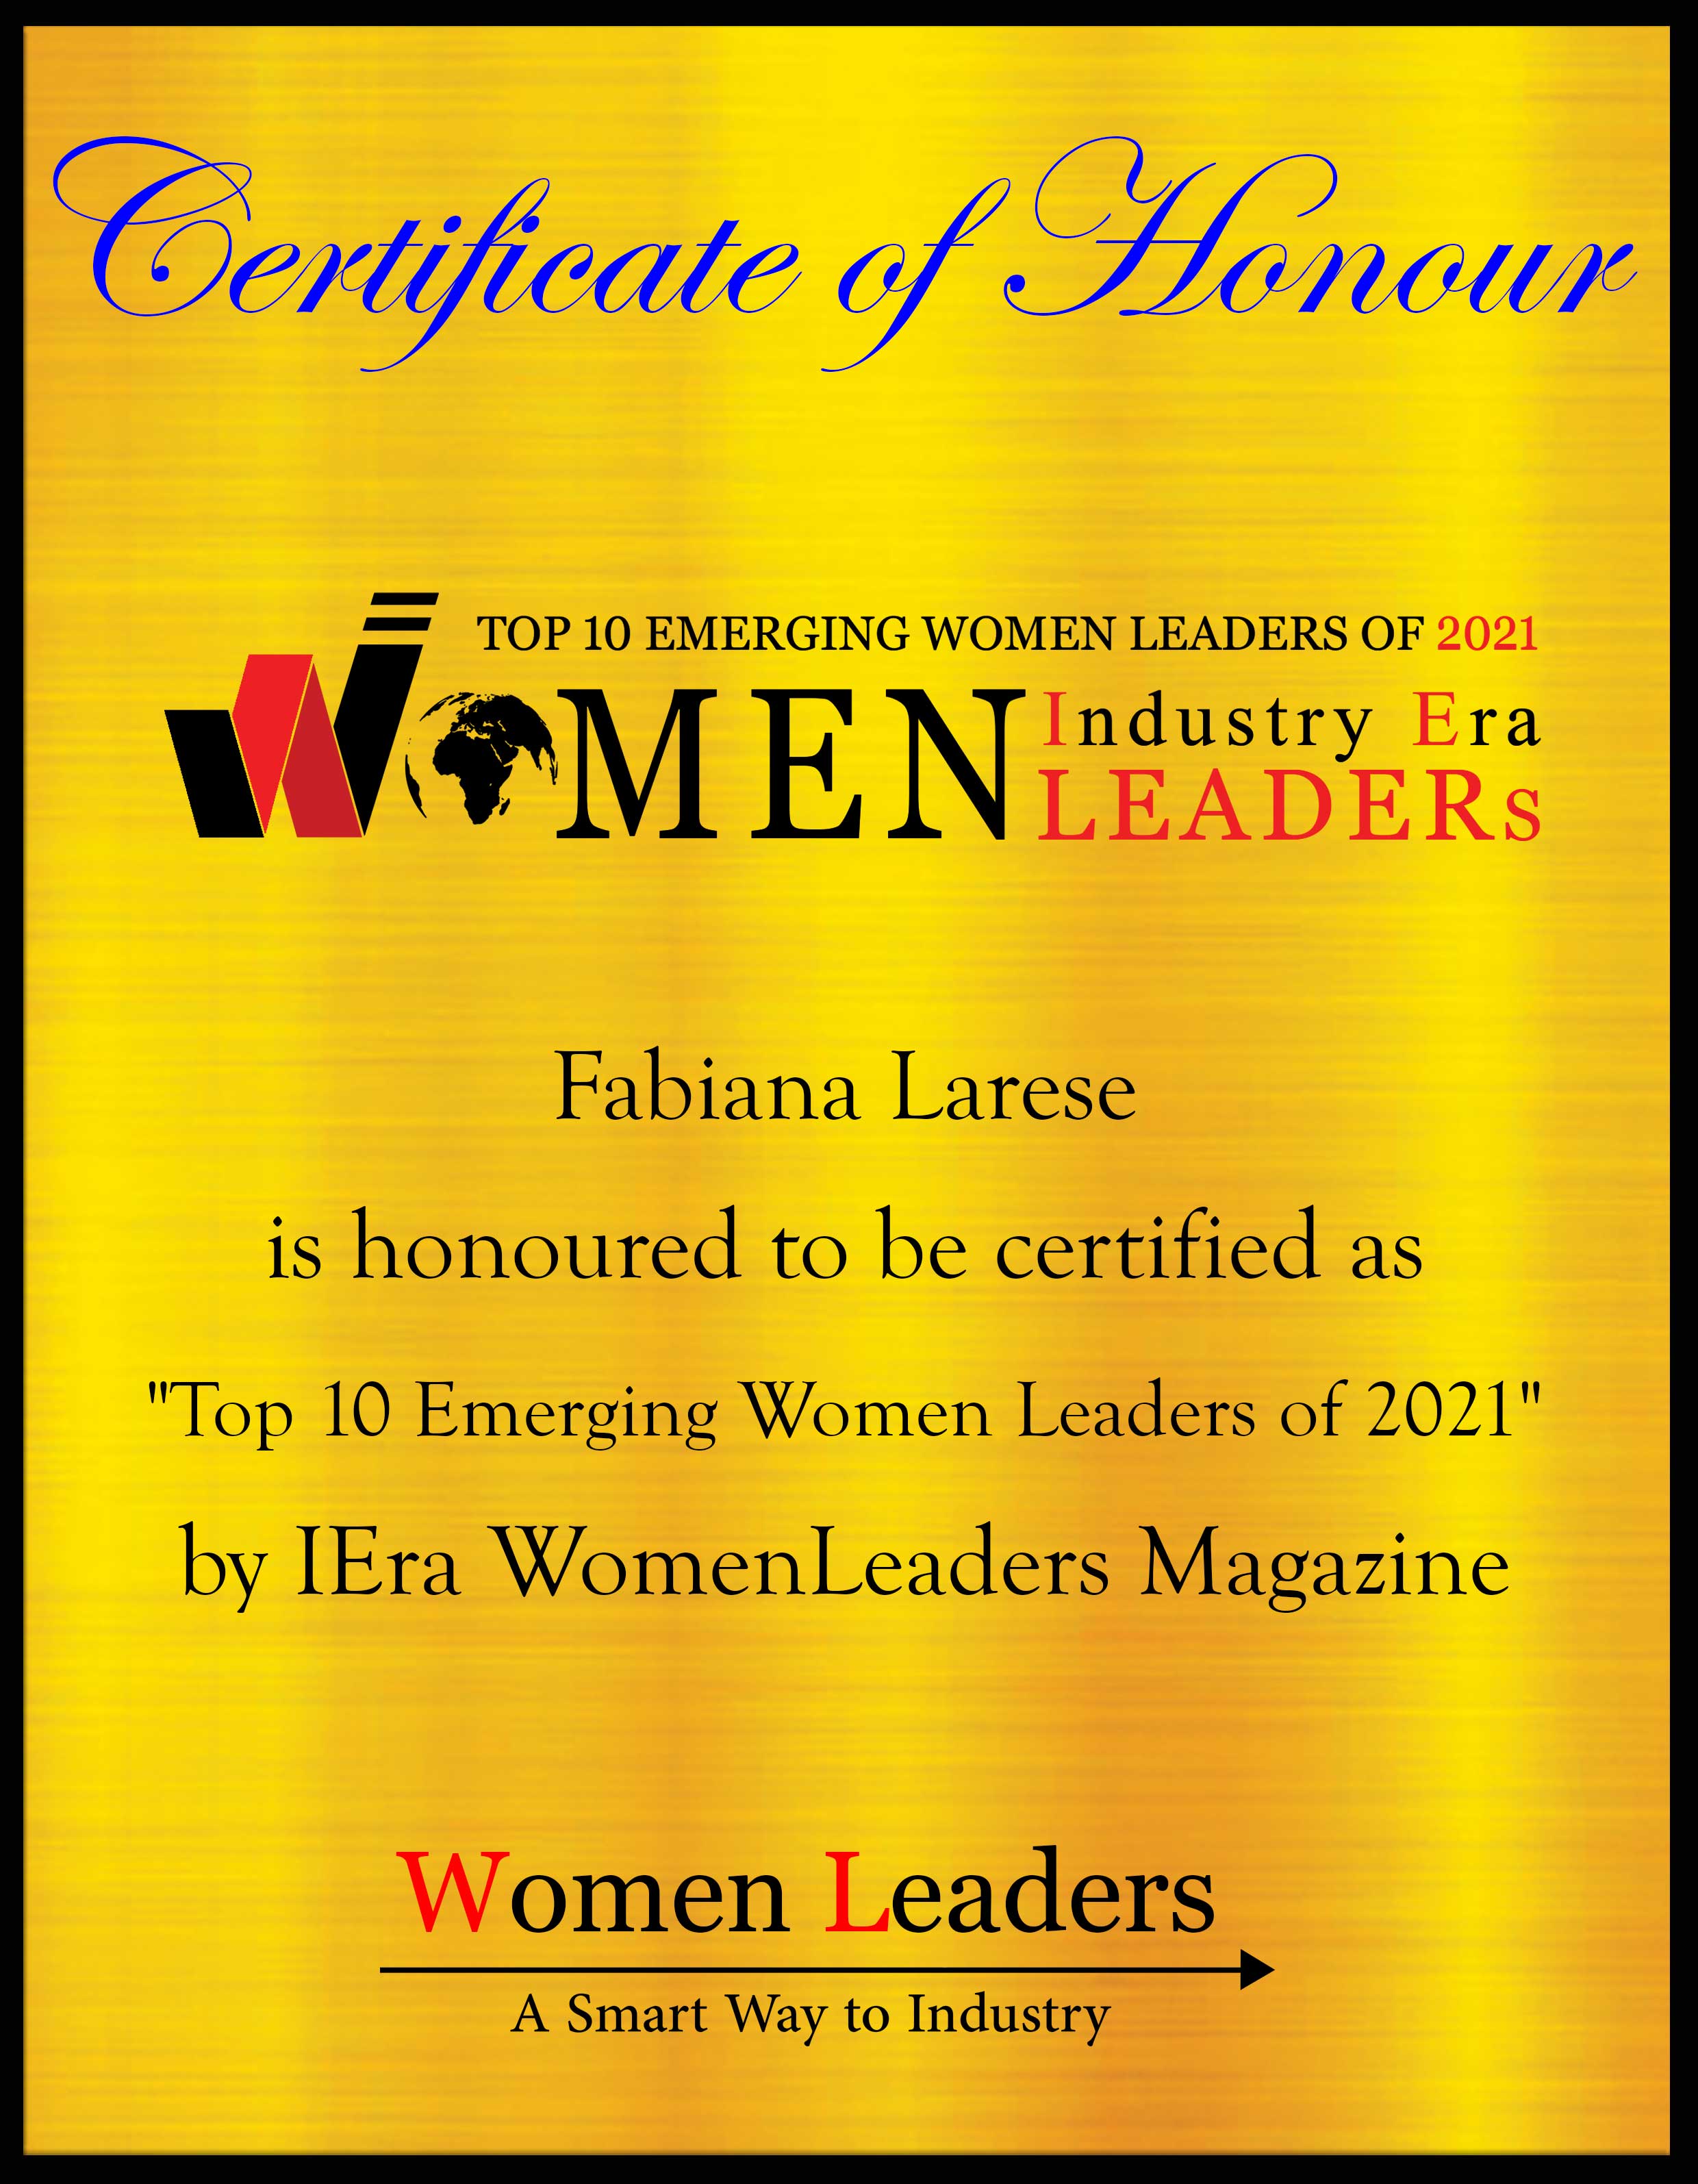 Fabiana Larese, Vice President Human Resources of Claridge Products, Most Empowering Women Leaders of 2021